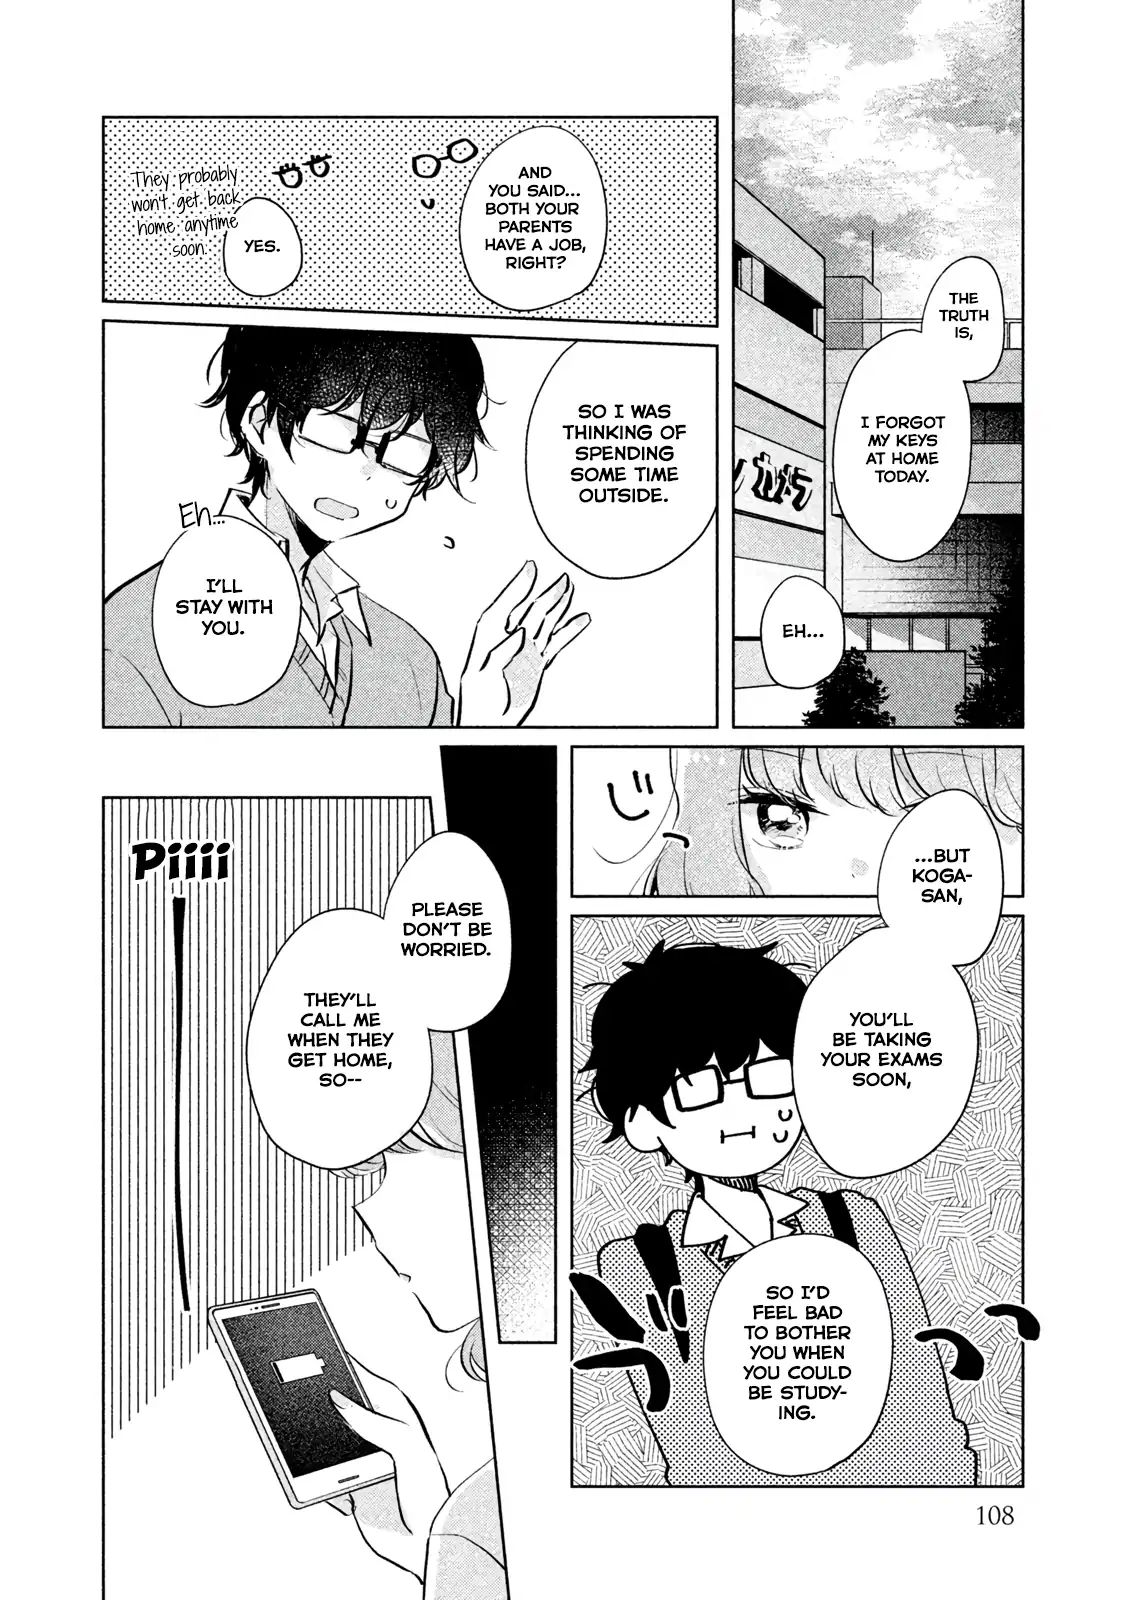 Read It's Not Meguro-san's First Time Manga English [New Chapters ...